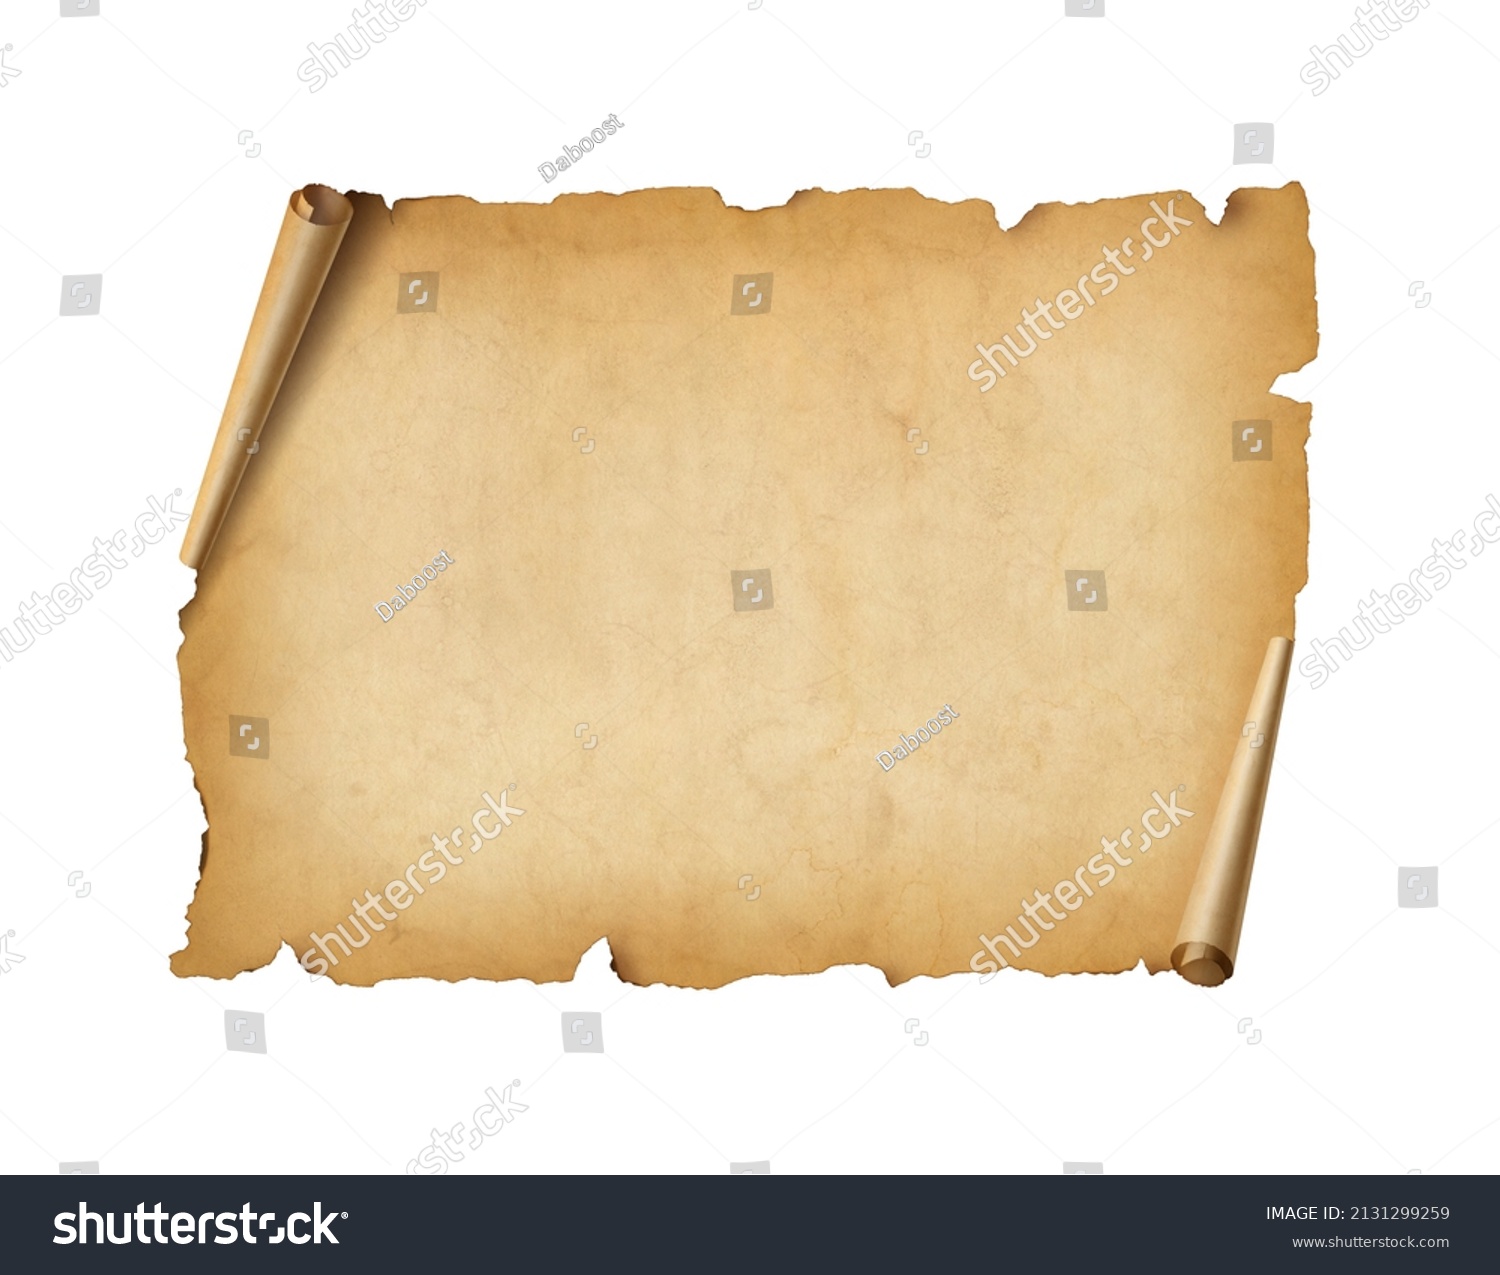 Old mediaeval paper sheet. Horizontal parchment scroll isolated on white background #2131299259